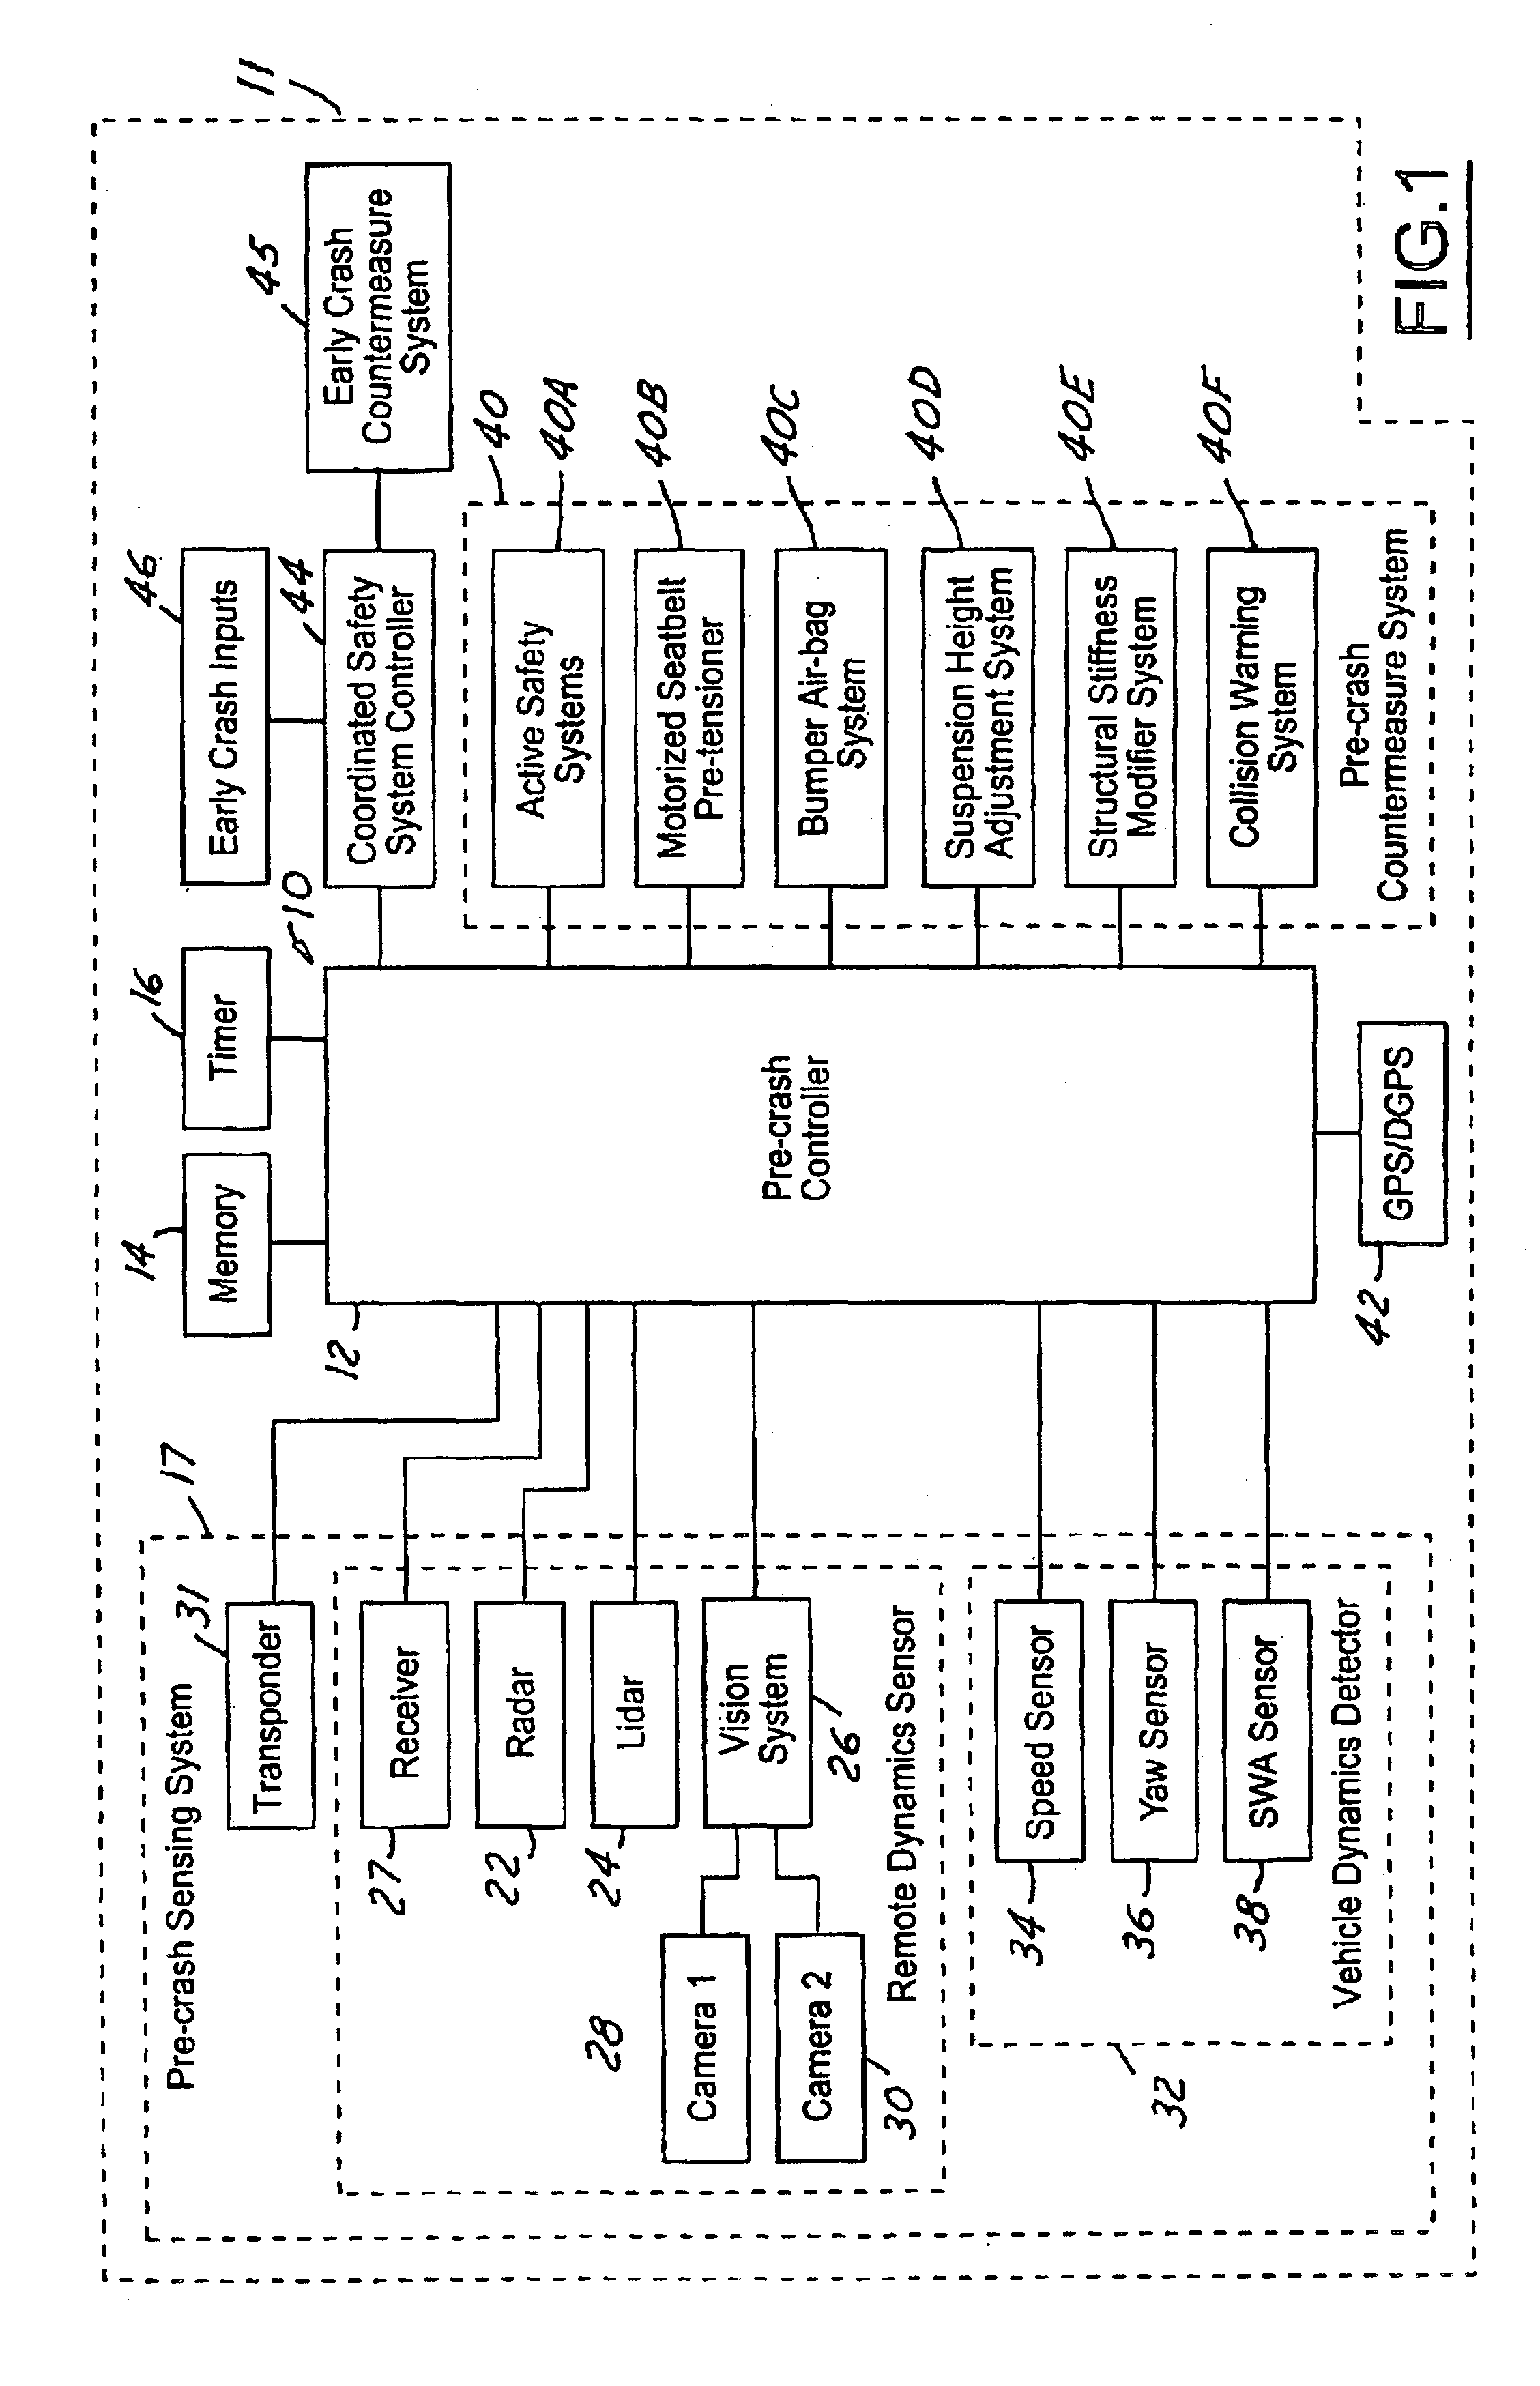 Method for operating a vehicle crash safety system in a vehicle having a pre-crash sensing system and countermeasure systems